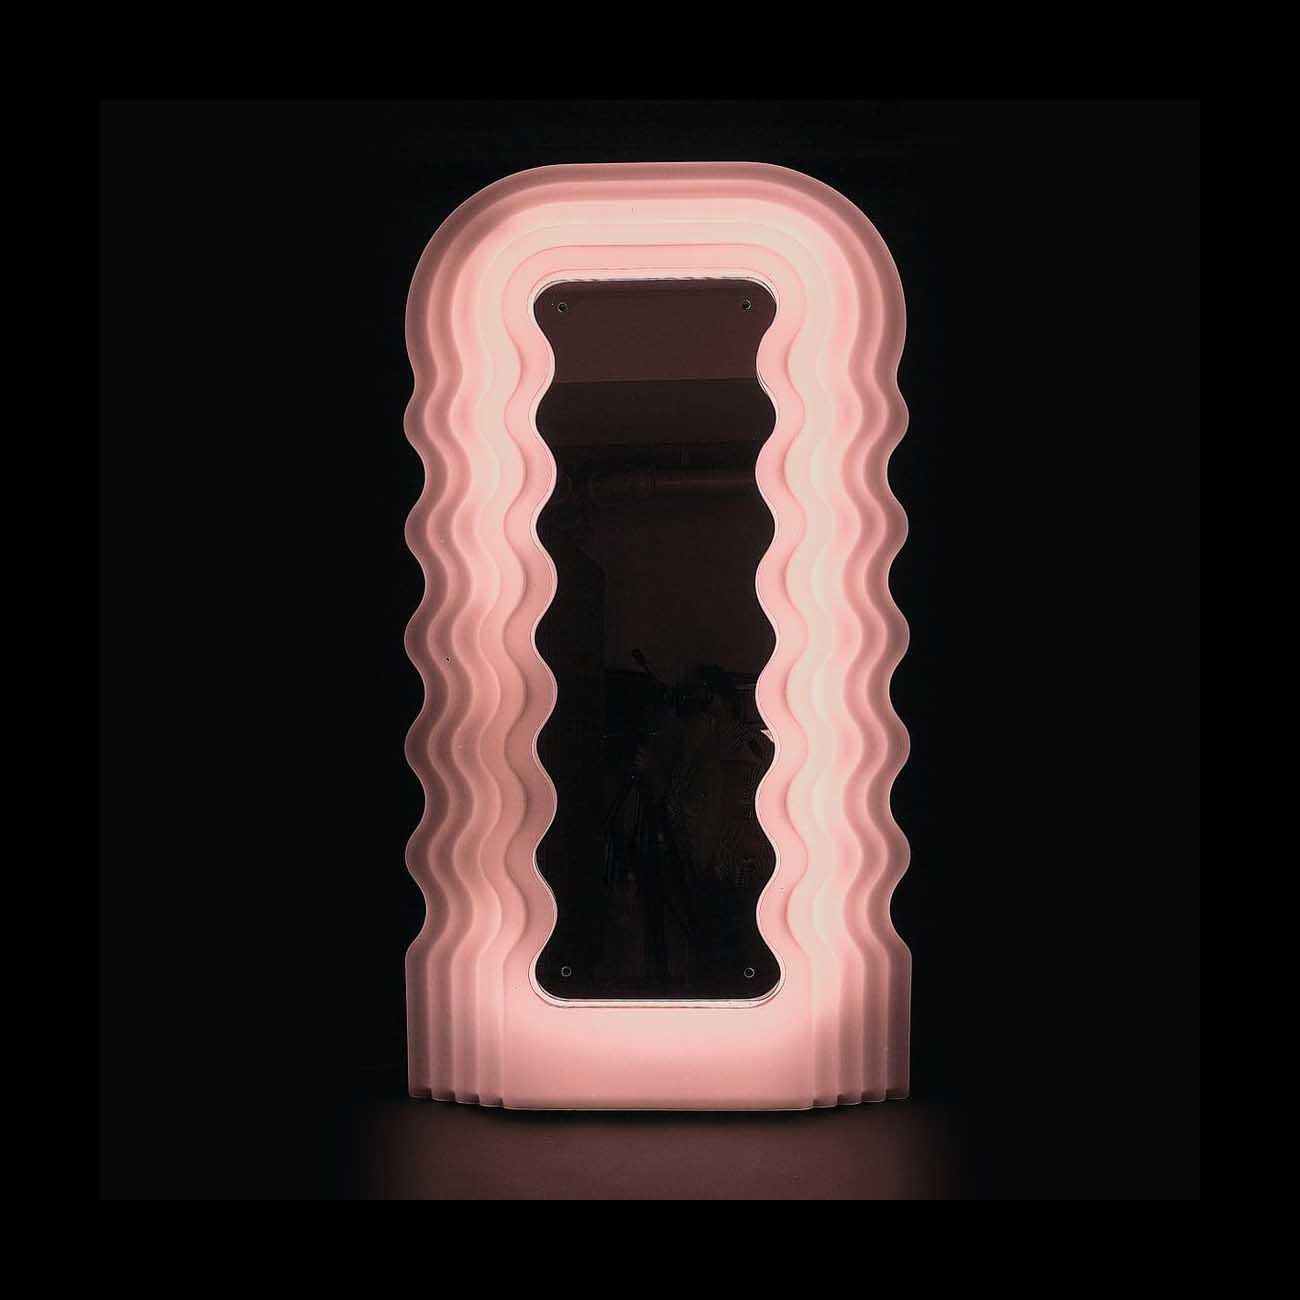 Ettore Sottsass Ultrafragola mirror object from 1970, which sold for €8,500 (about $9,150) plus the buyer’s premium in October 2023. Image courtesy of Quittenbaum Kunstauktionen GmbH and LiveAuctioneers.